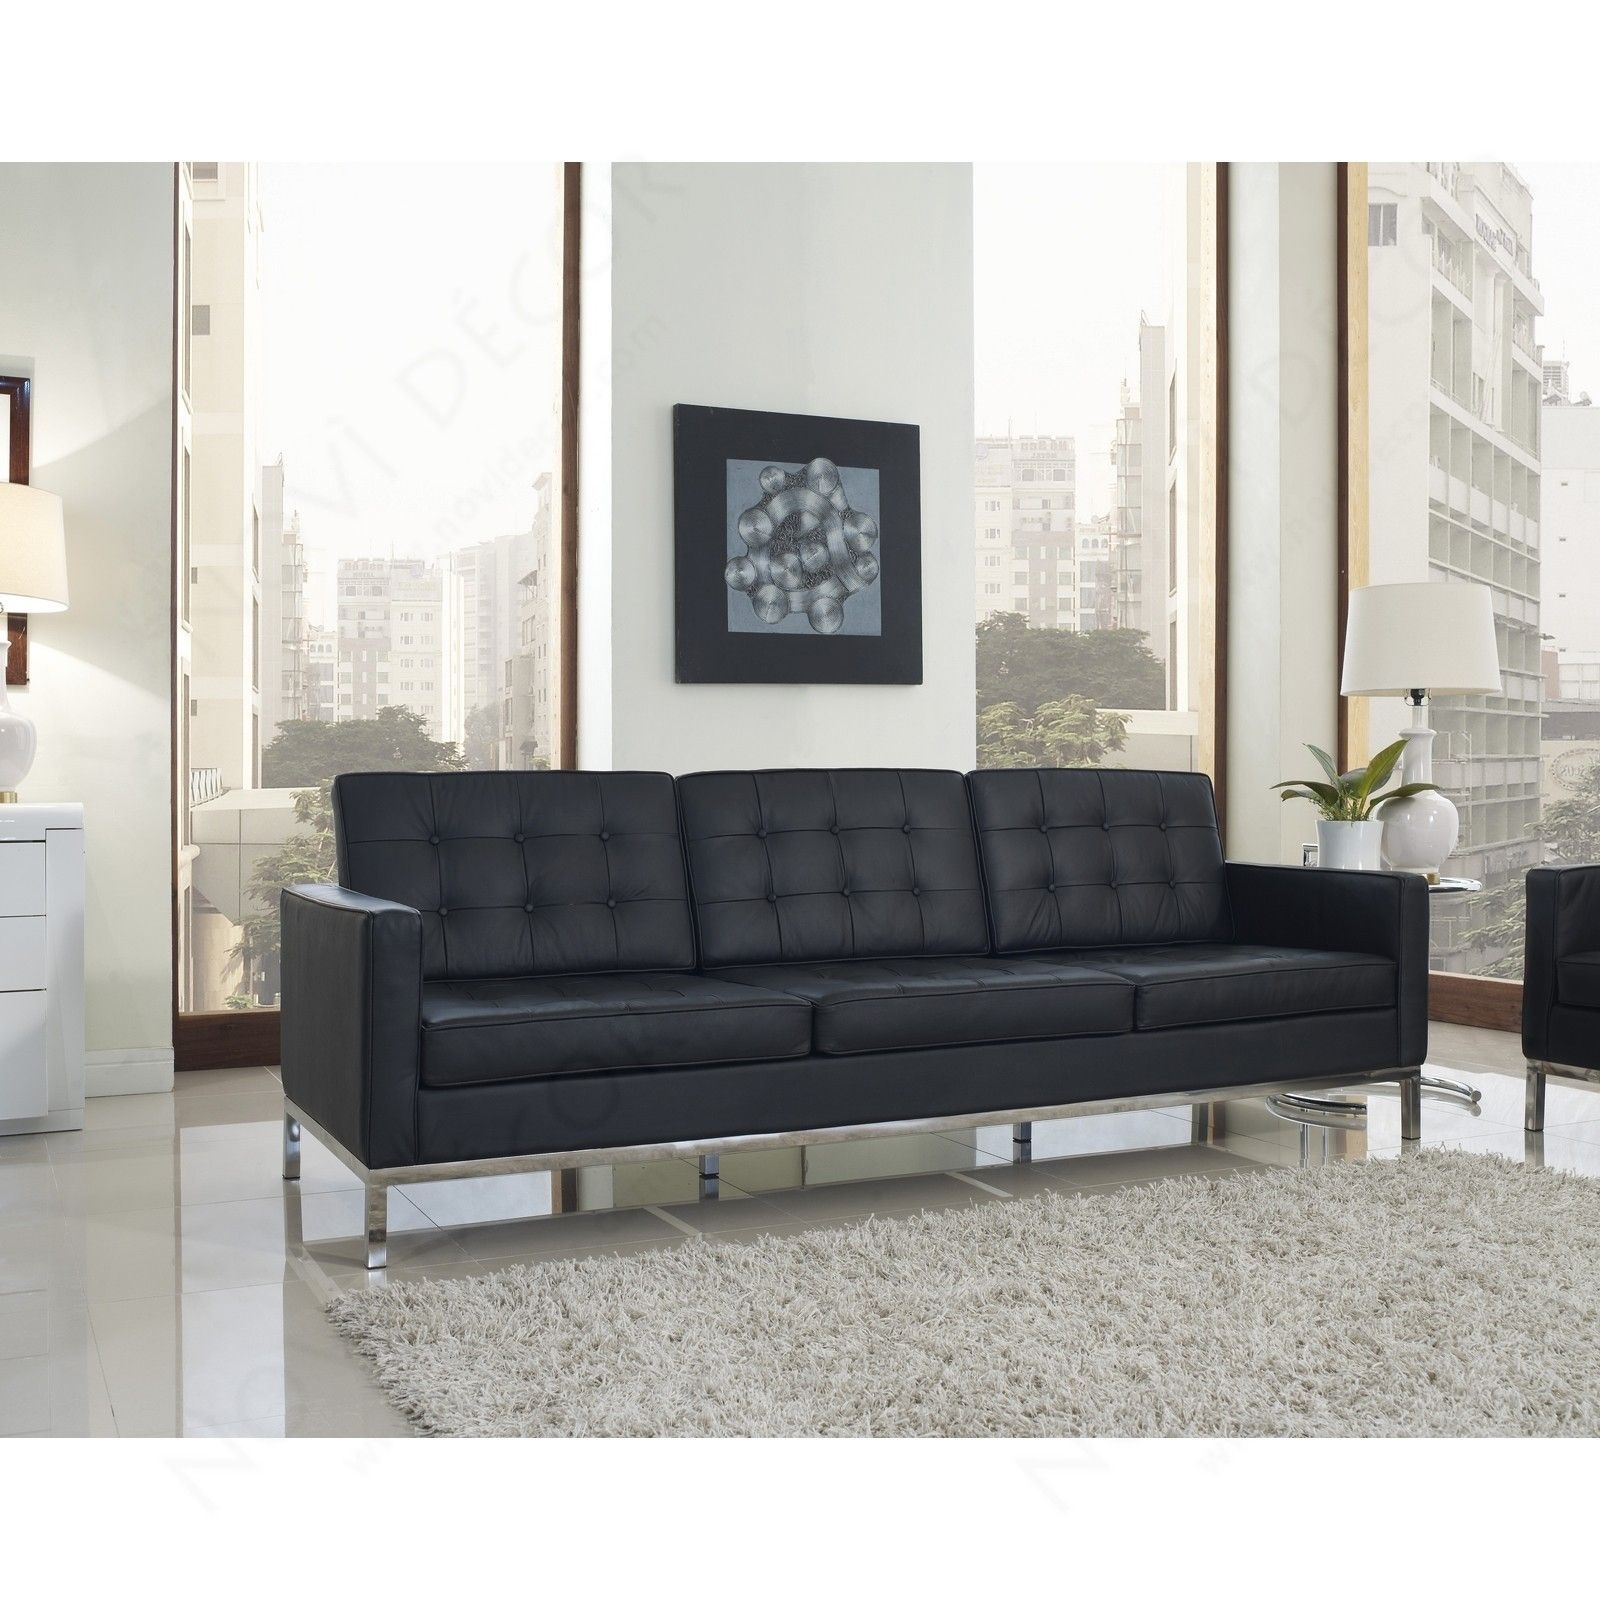 Sofas Center Florence Knoll Sofa Comfort Reproduction Reviews With Florence Knoll Leather Sofas (View 1 of 15)